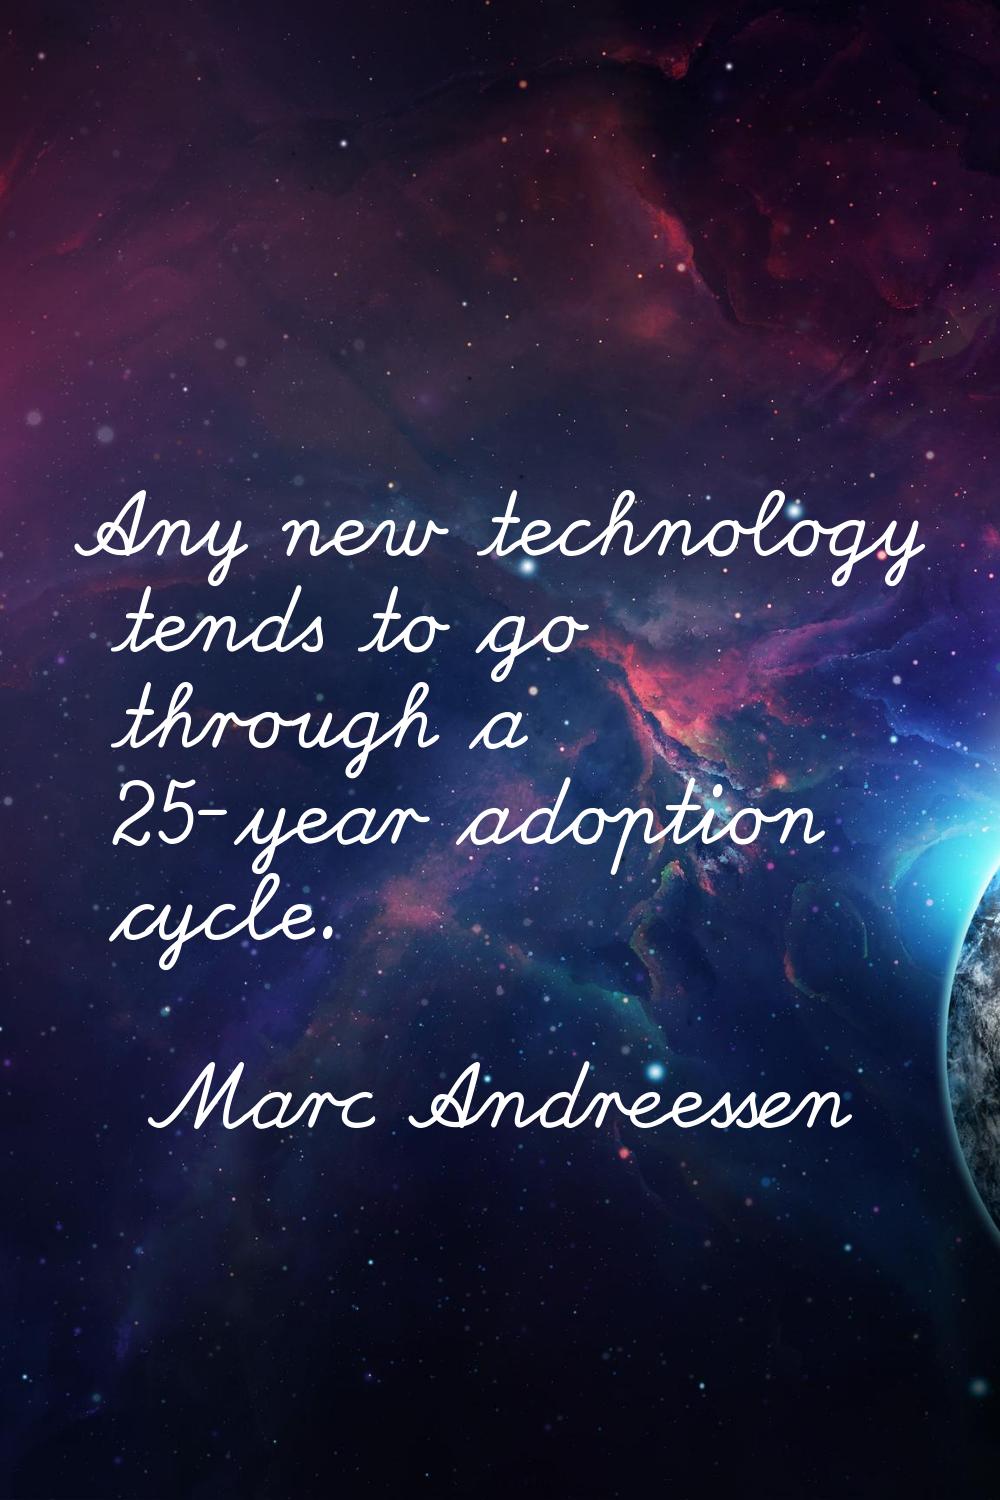 Any new technology tends to go through a 25-year adoption cycle.